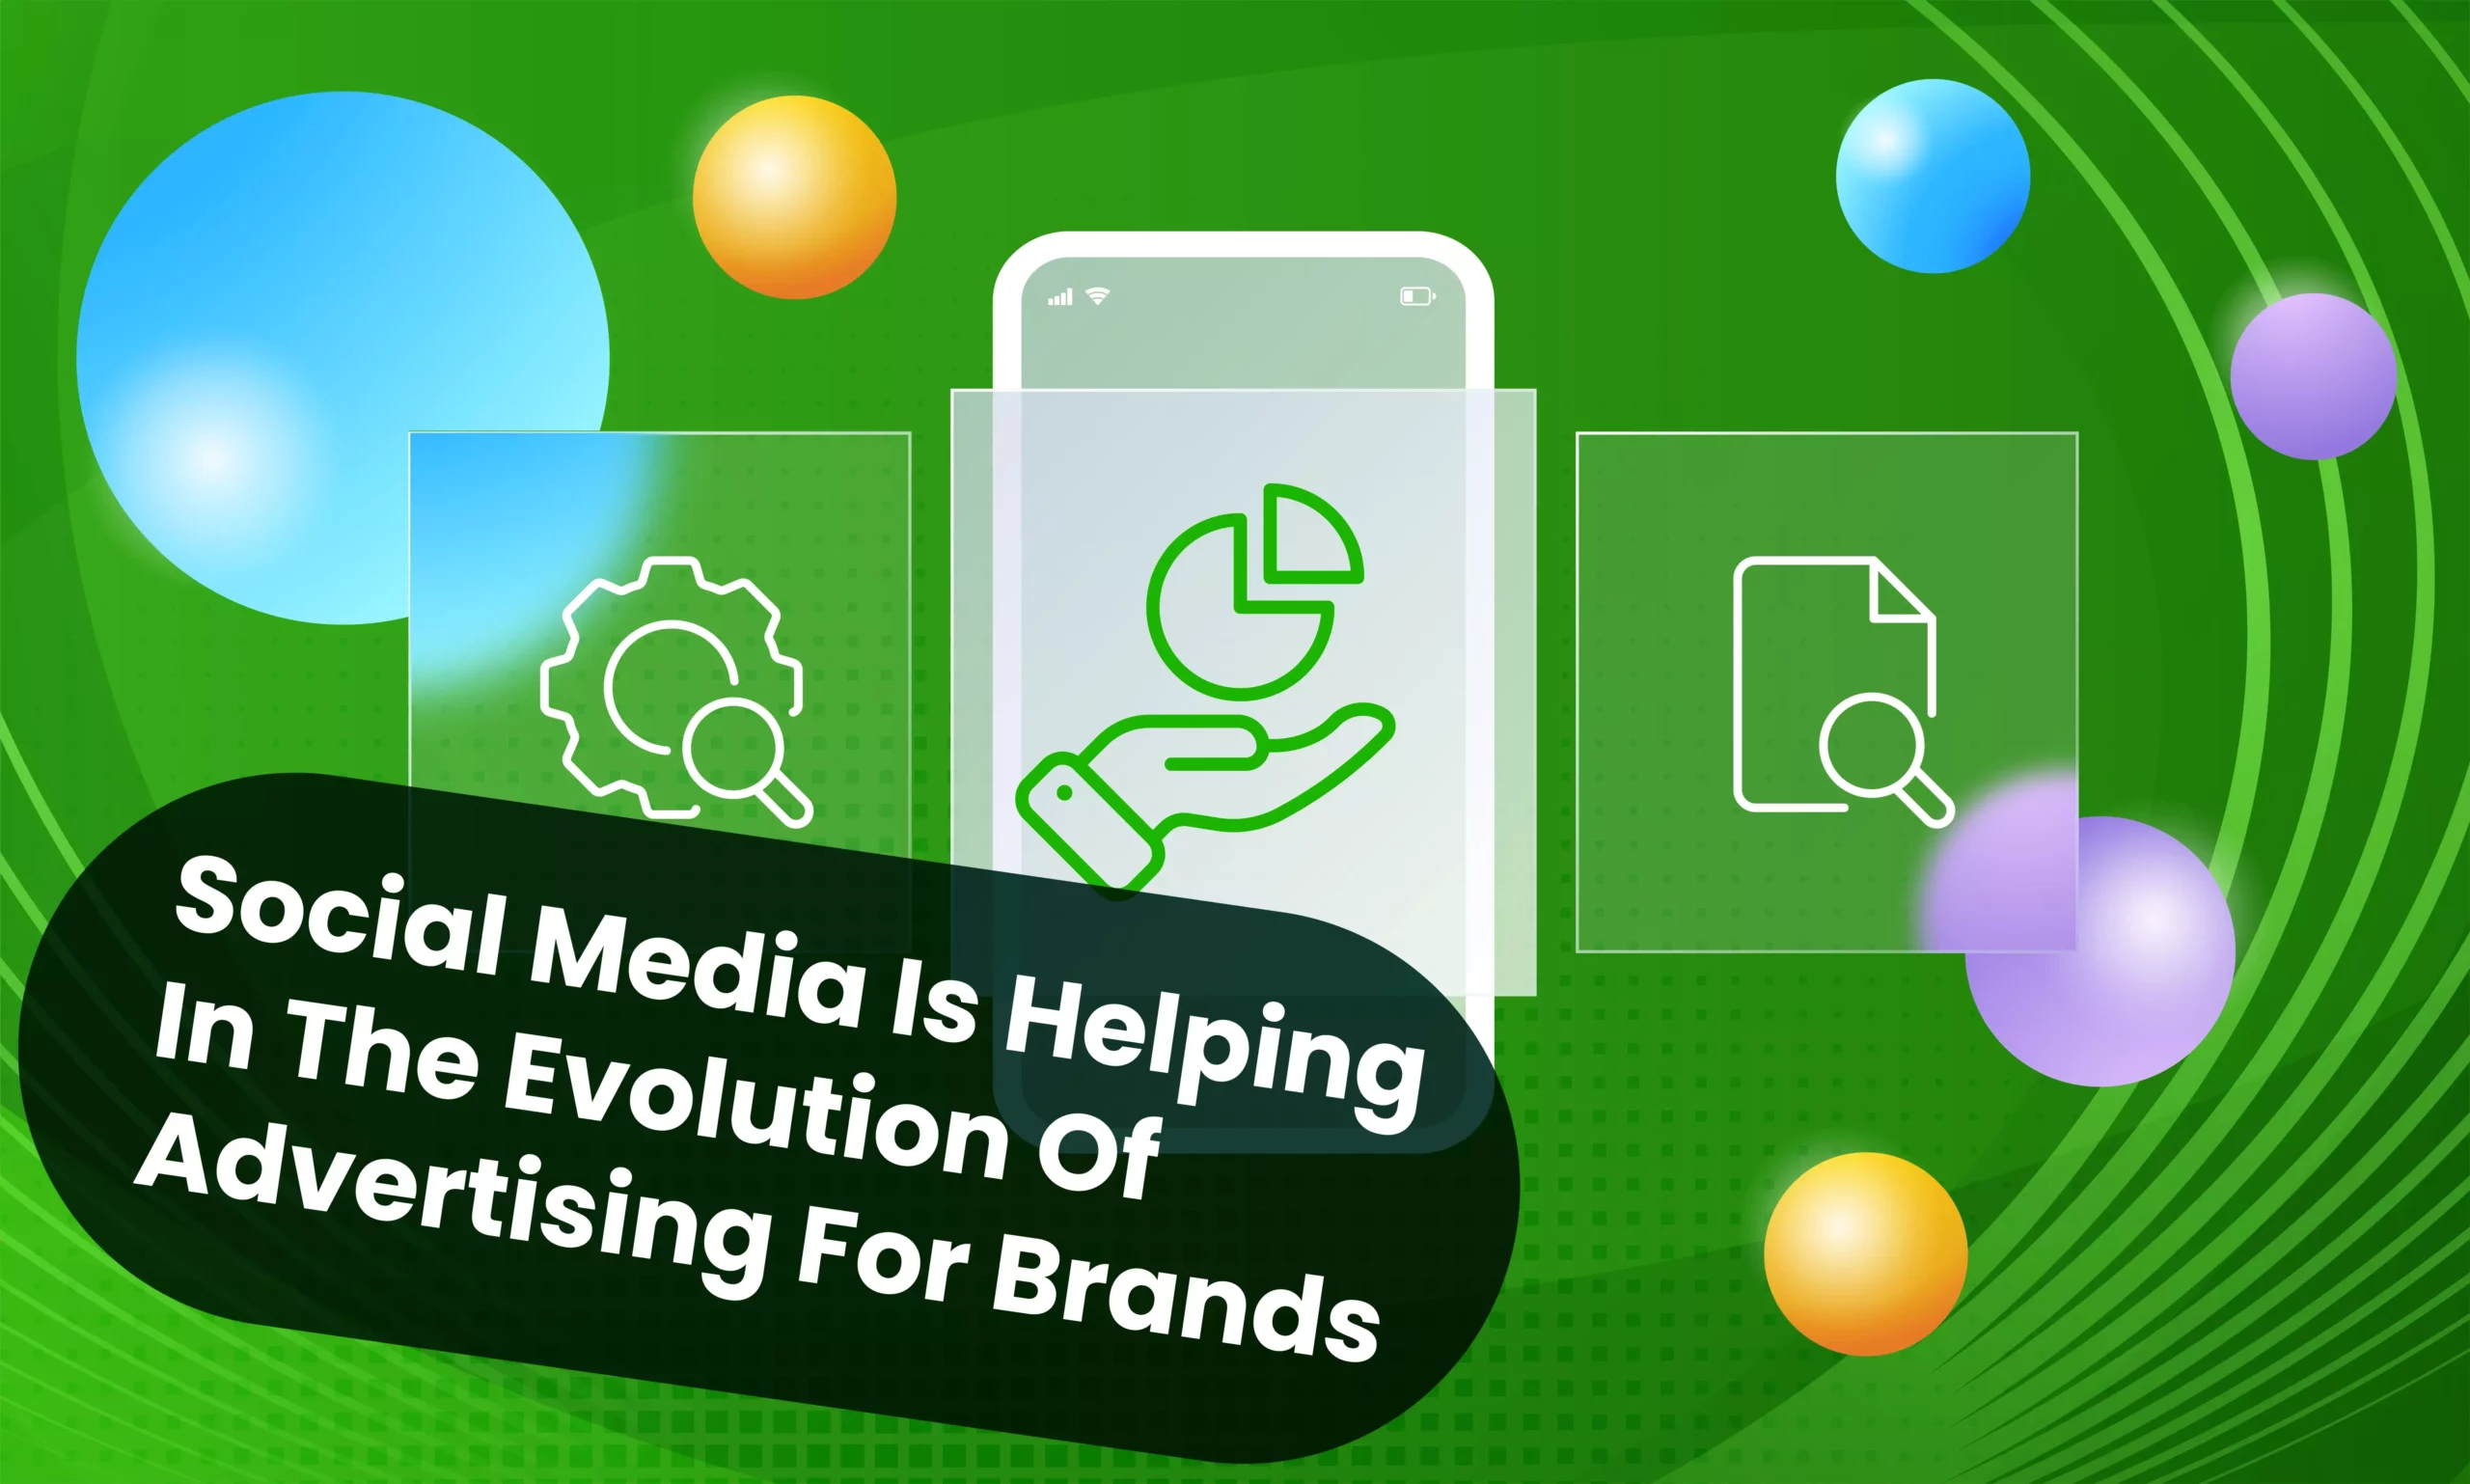 Social Media Is Helping In The Evolution Of Advertising For Brands